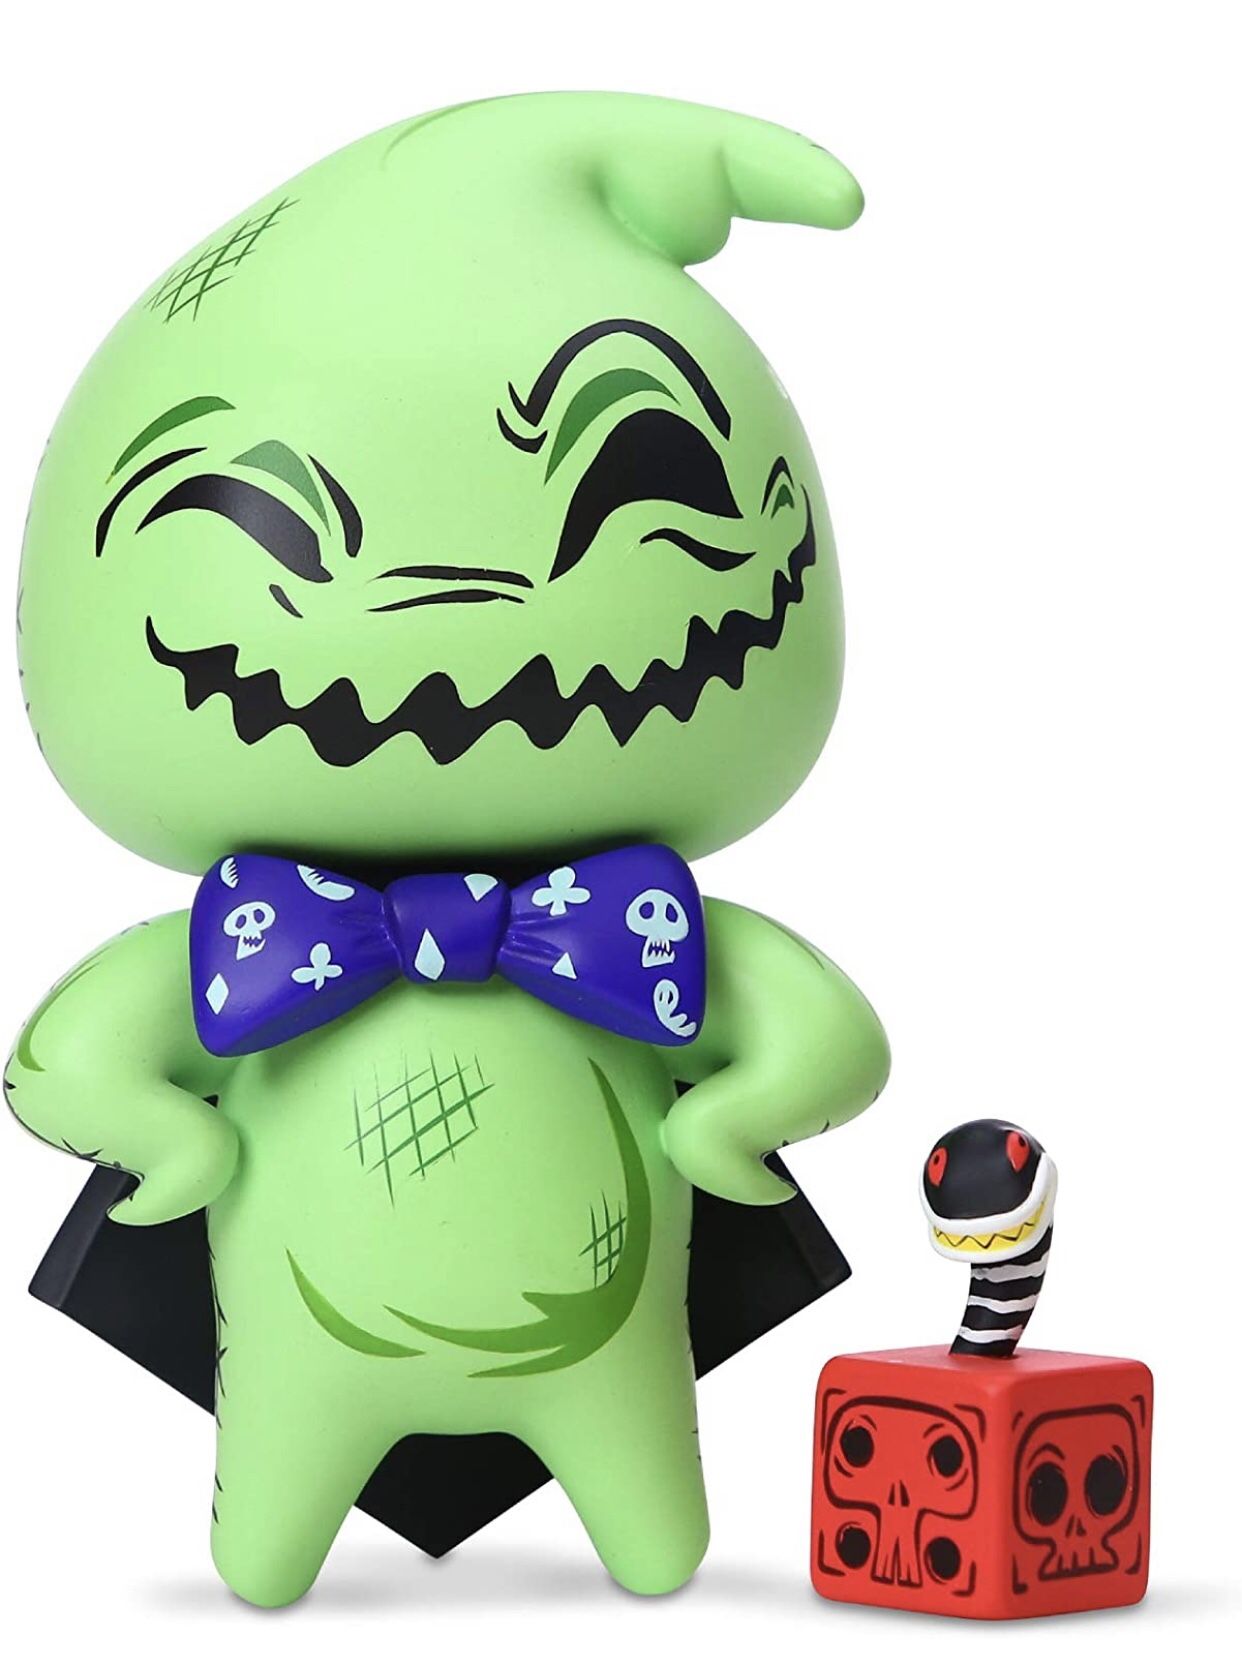 Oogie boogie with dice figurine showcase collection -Brand New